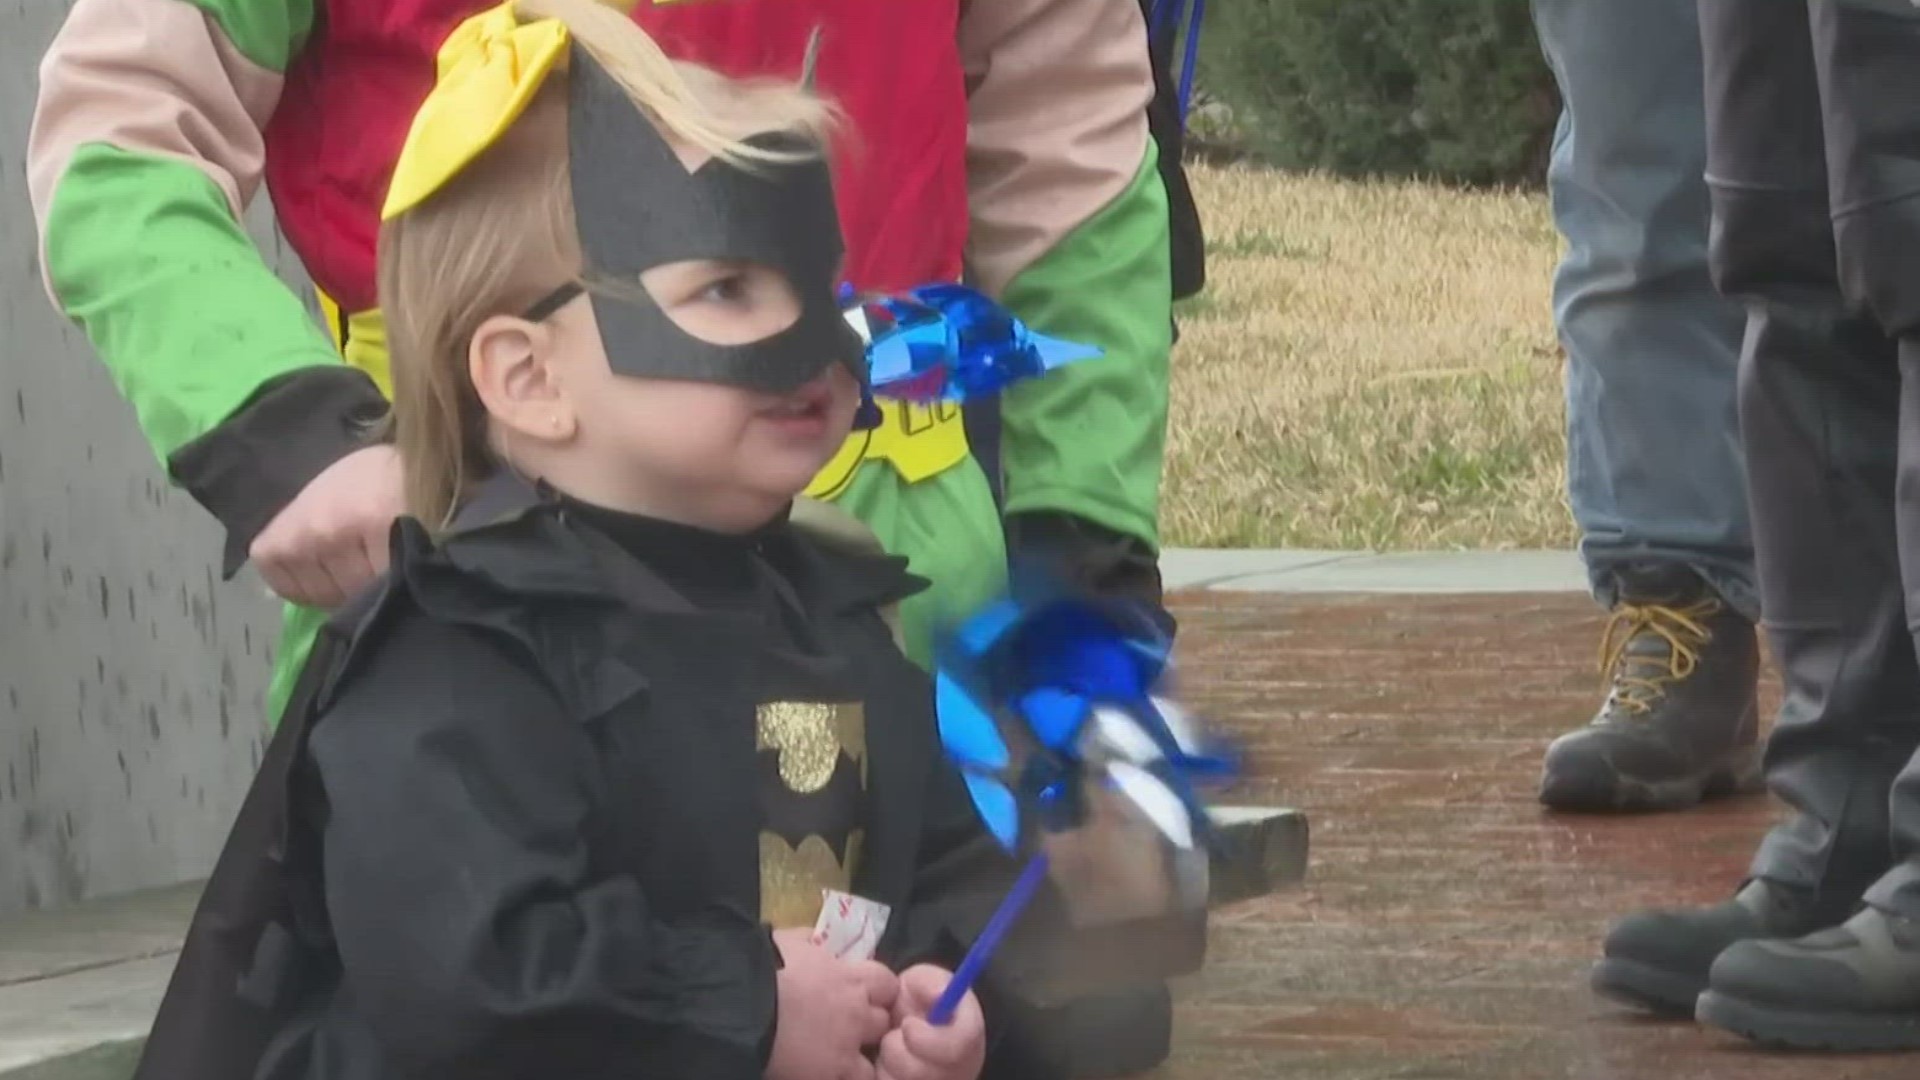 The community walked with local law enforcement in superhero outfits and blue clothing on Saturday to highlight child abuse prevention month.